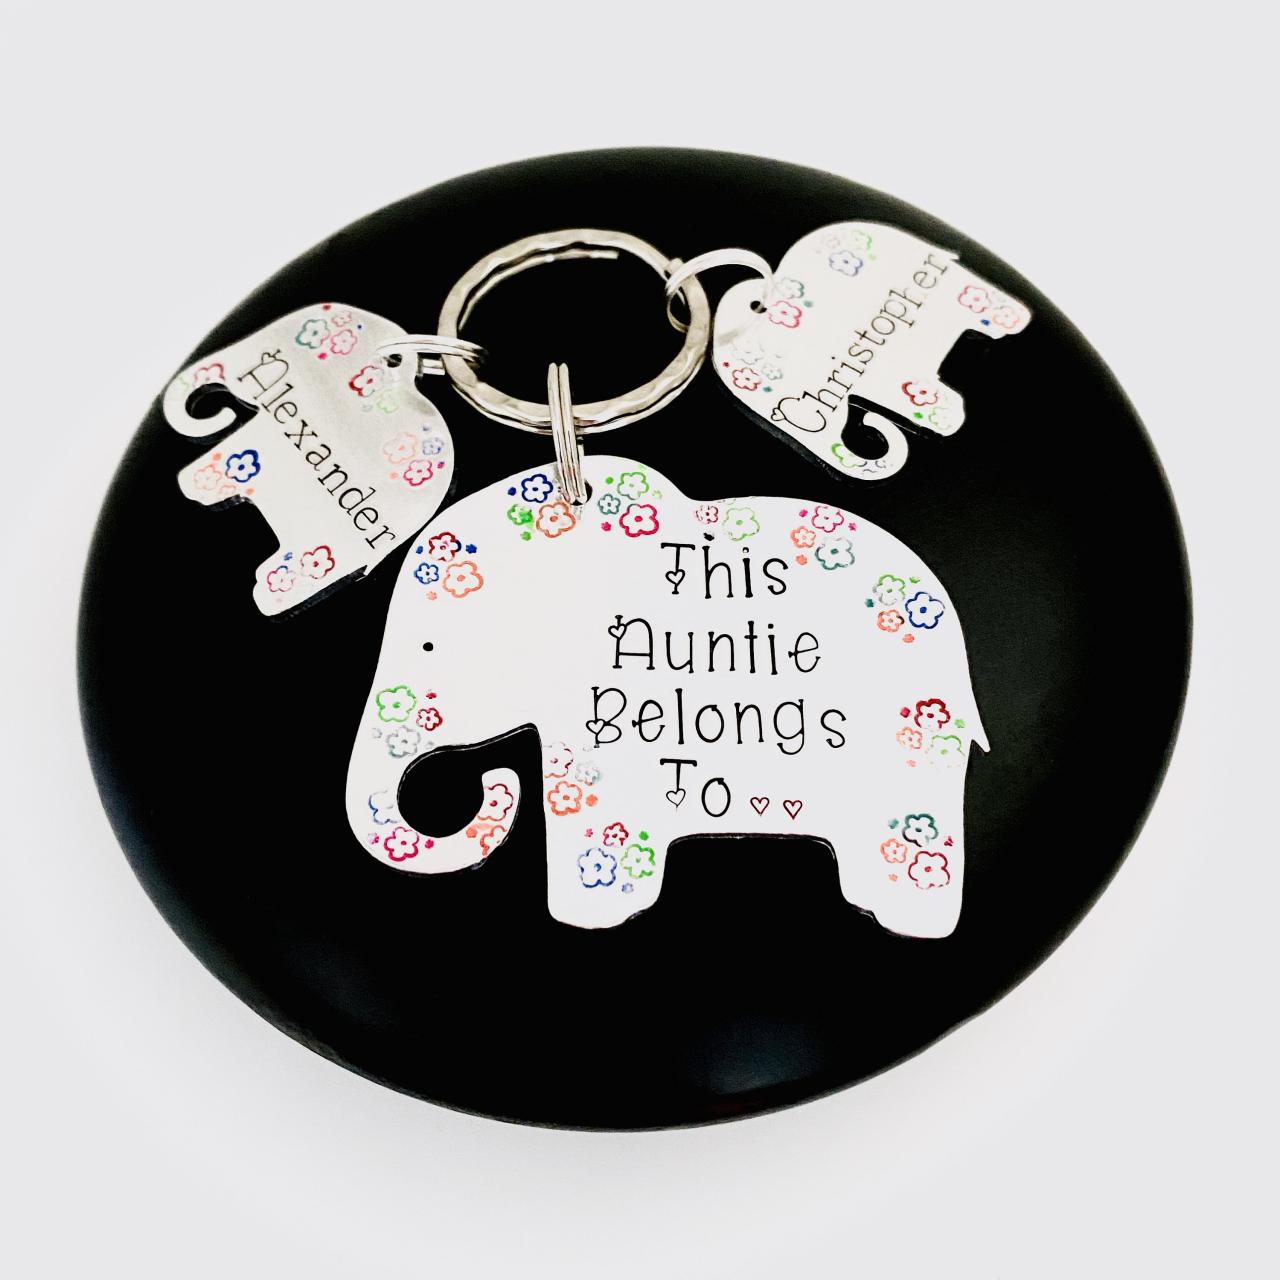 This Auntie Belongs To Keyring, Personalised For Auntie, Family Tree Gift, Auntie Aunty Keychain, Elephant Gift, Personalized Auntie Gift..